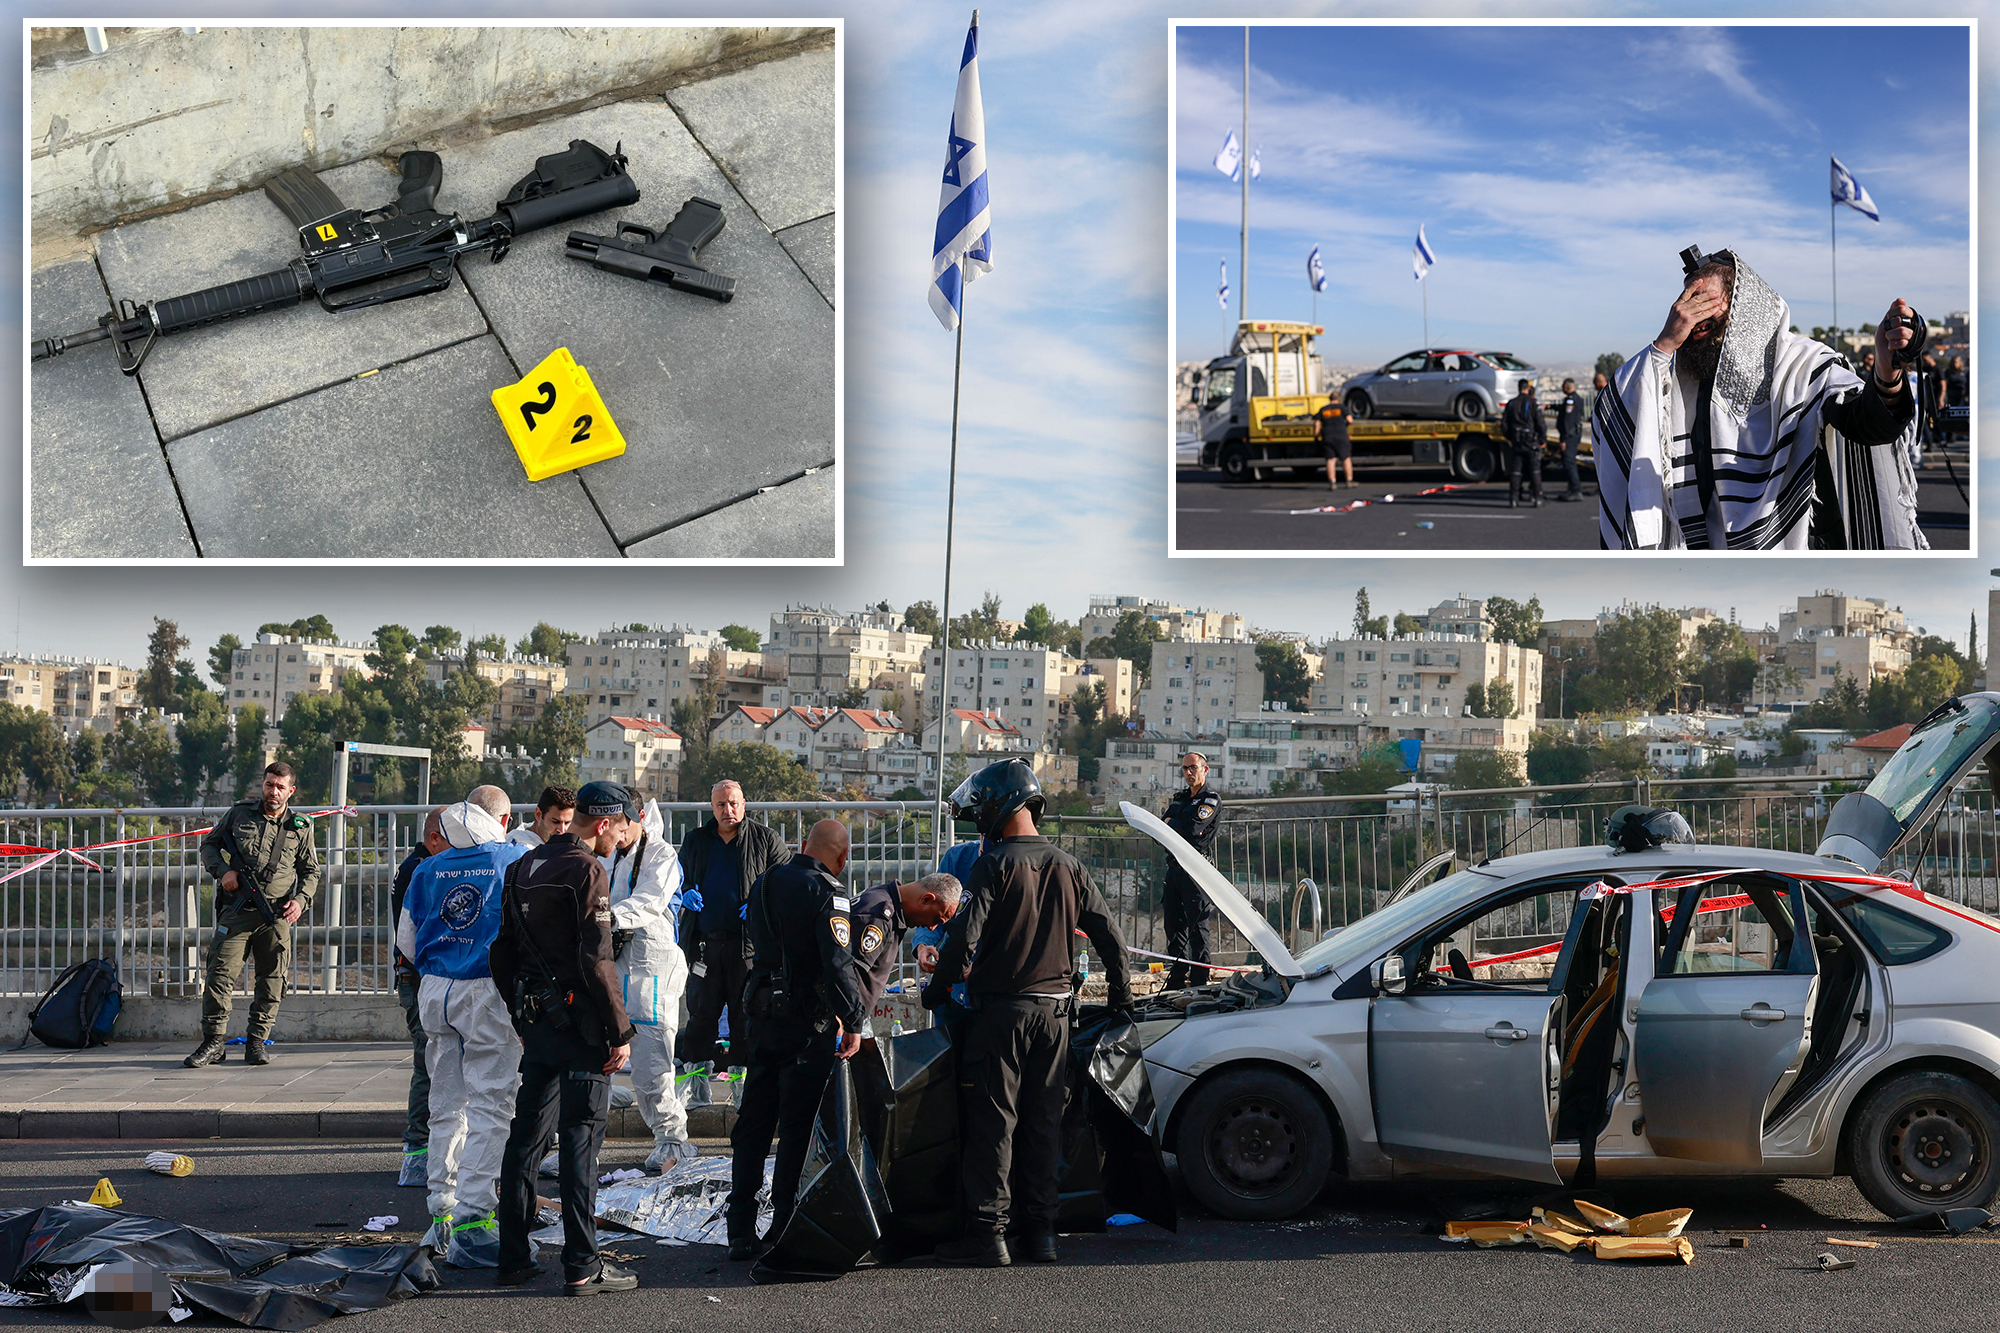 Two Palestinians open fire at Jerusalem bus stop, killing three and injuring several others